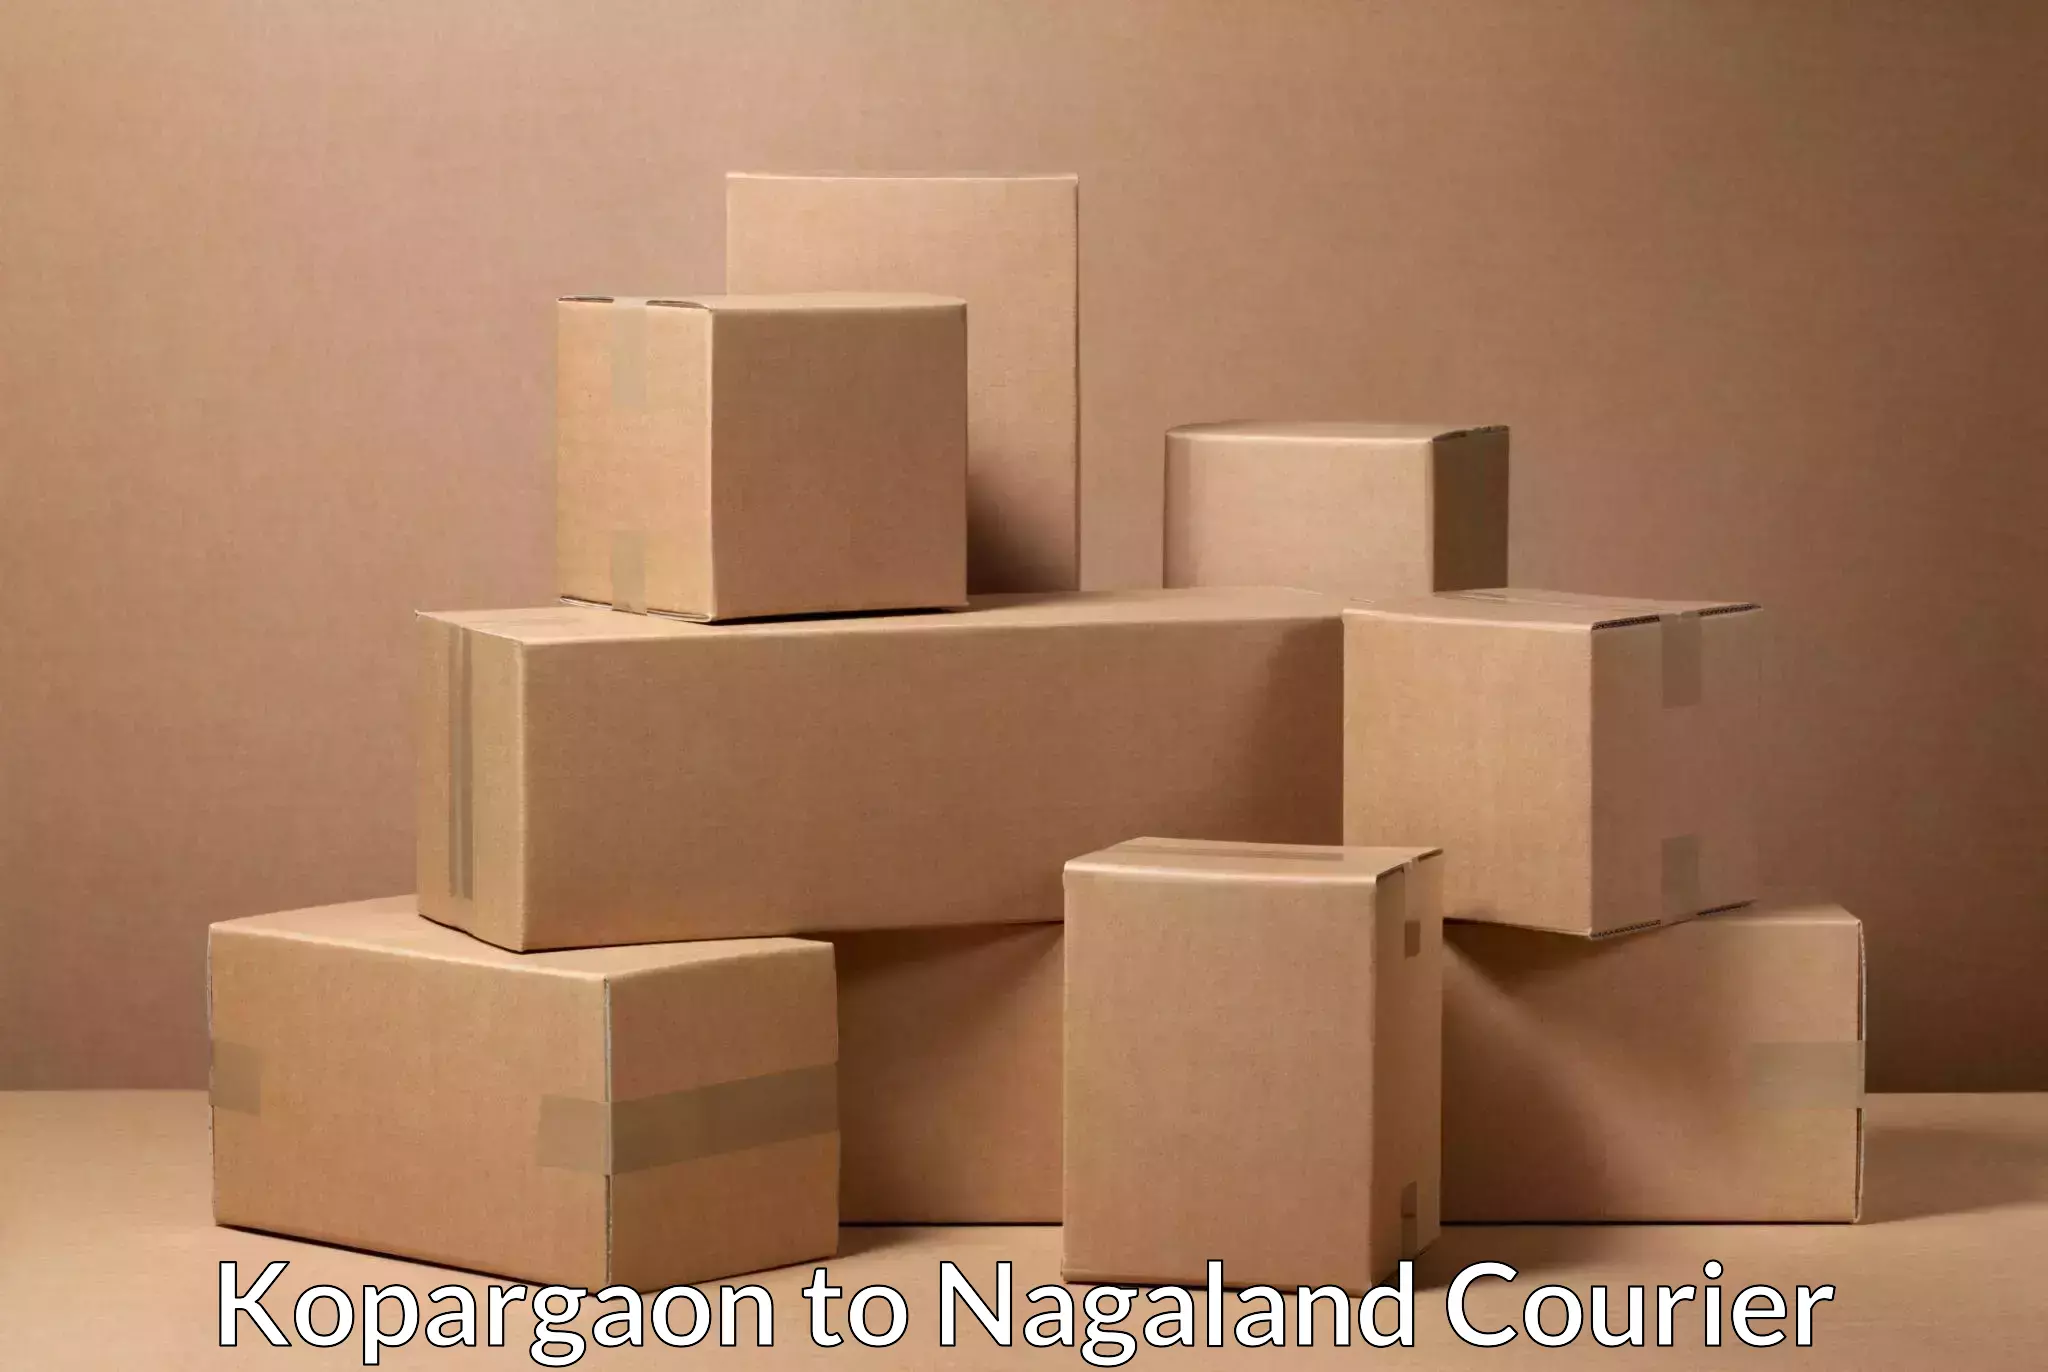 Quality courier services in Kopargaon to Nagaland